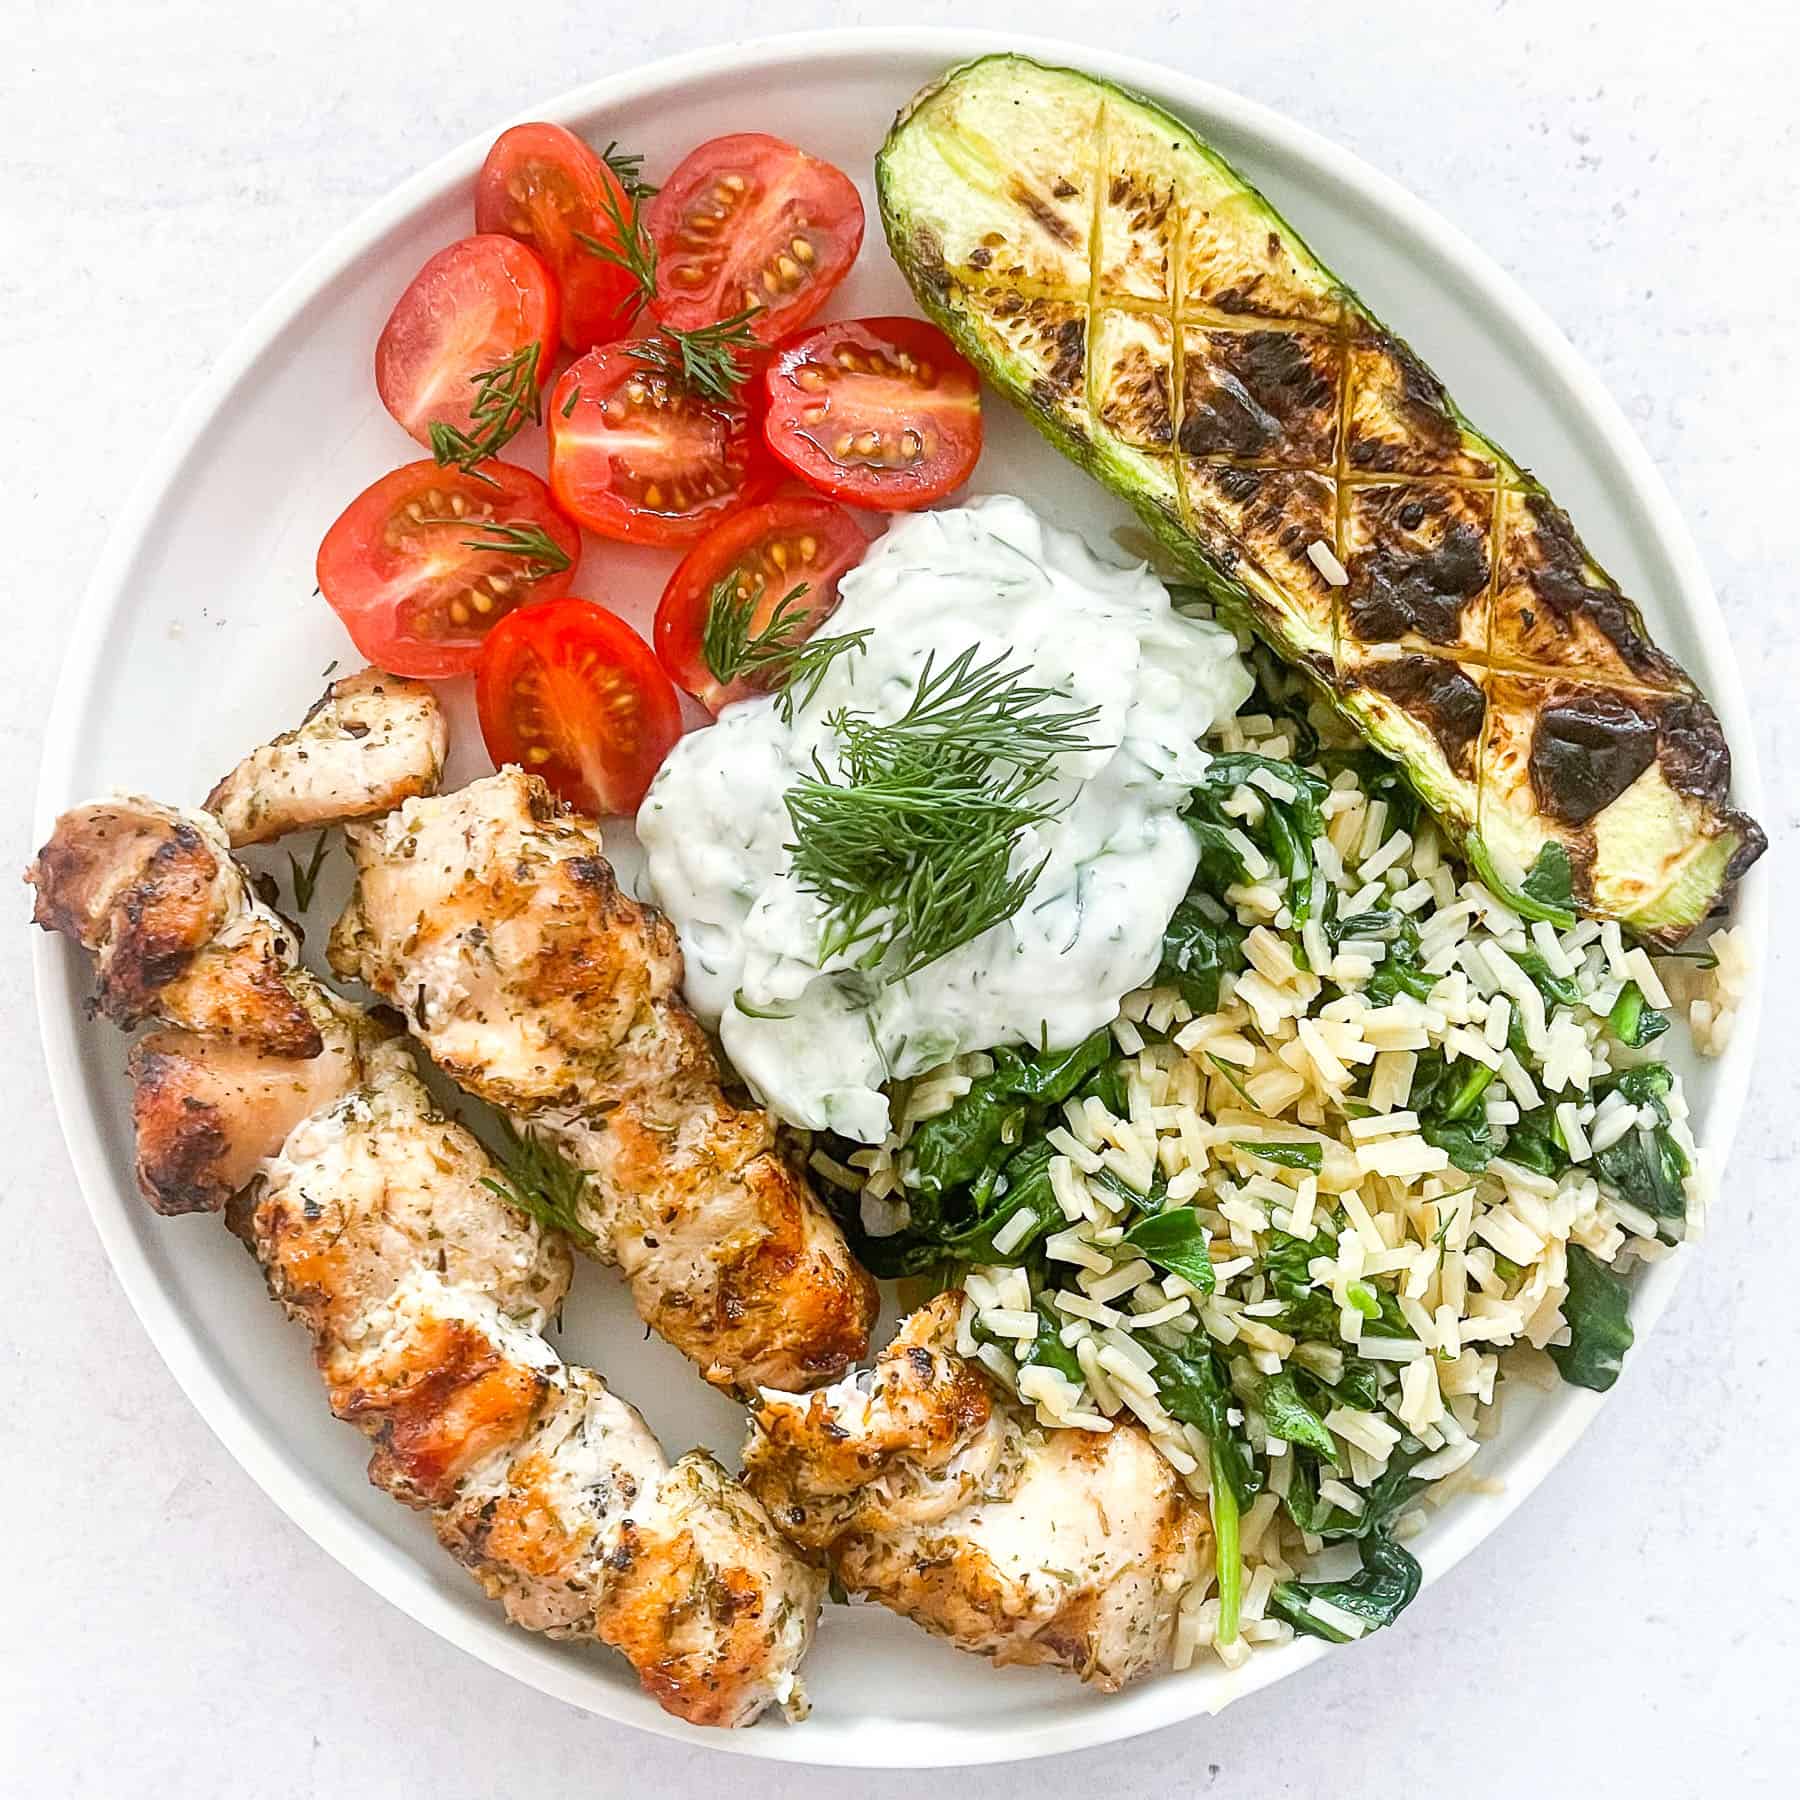 keto grilled chicken kabobs on a white plate with veggies and tzatziki sauce with a white background